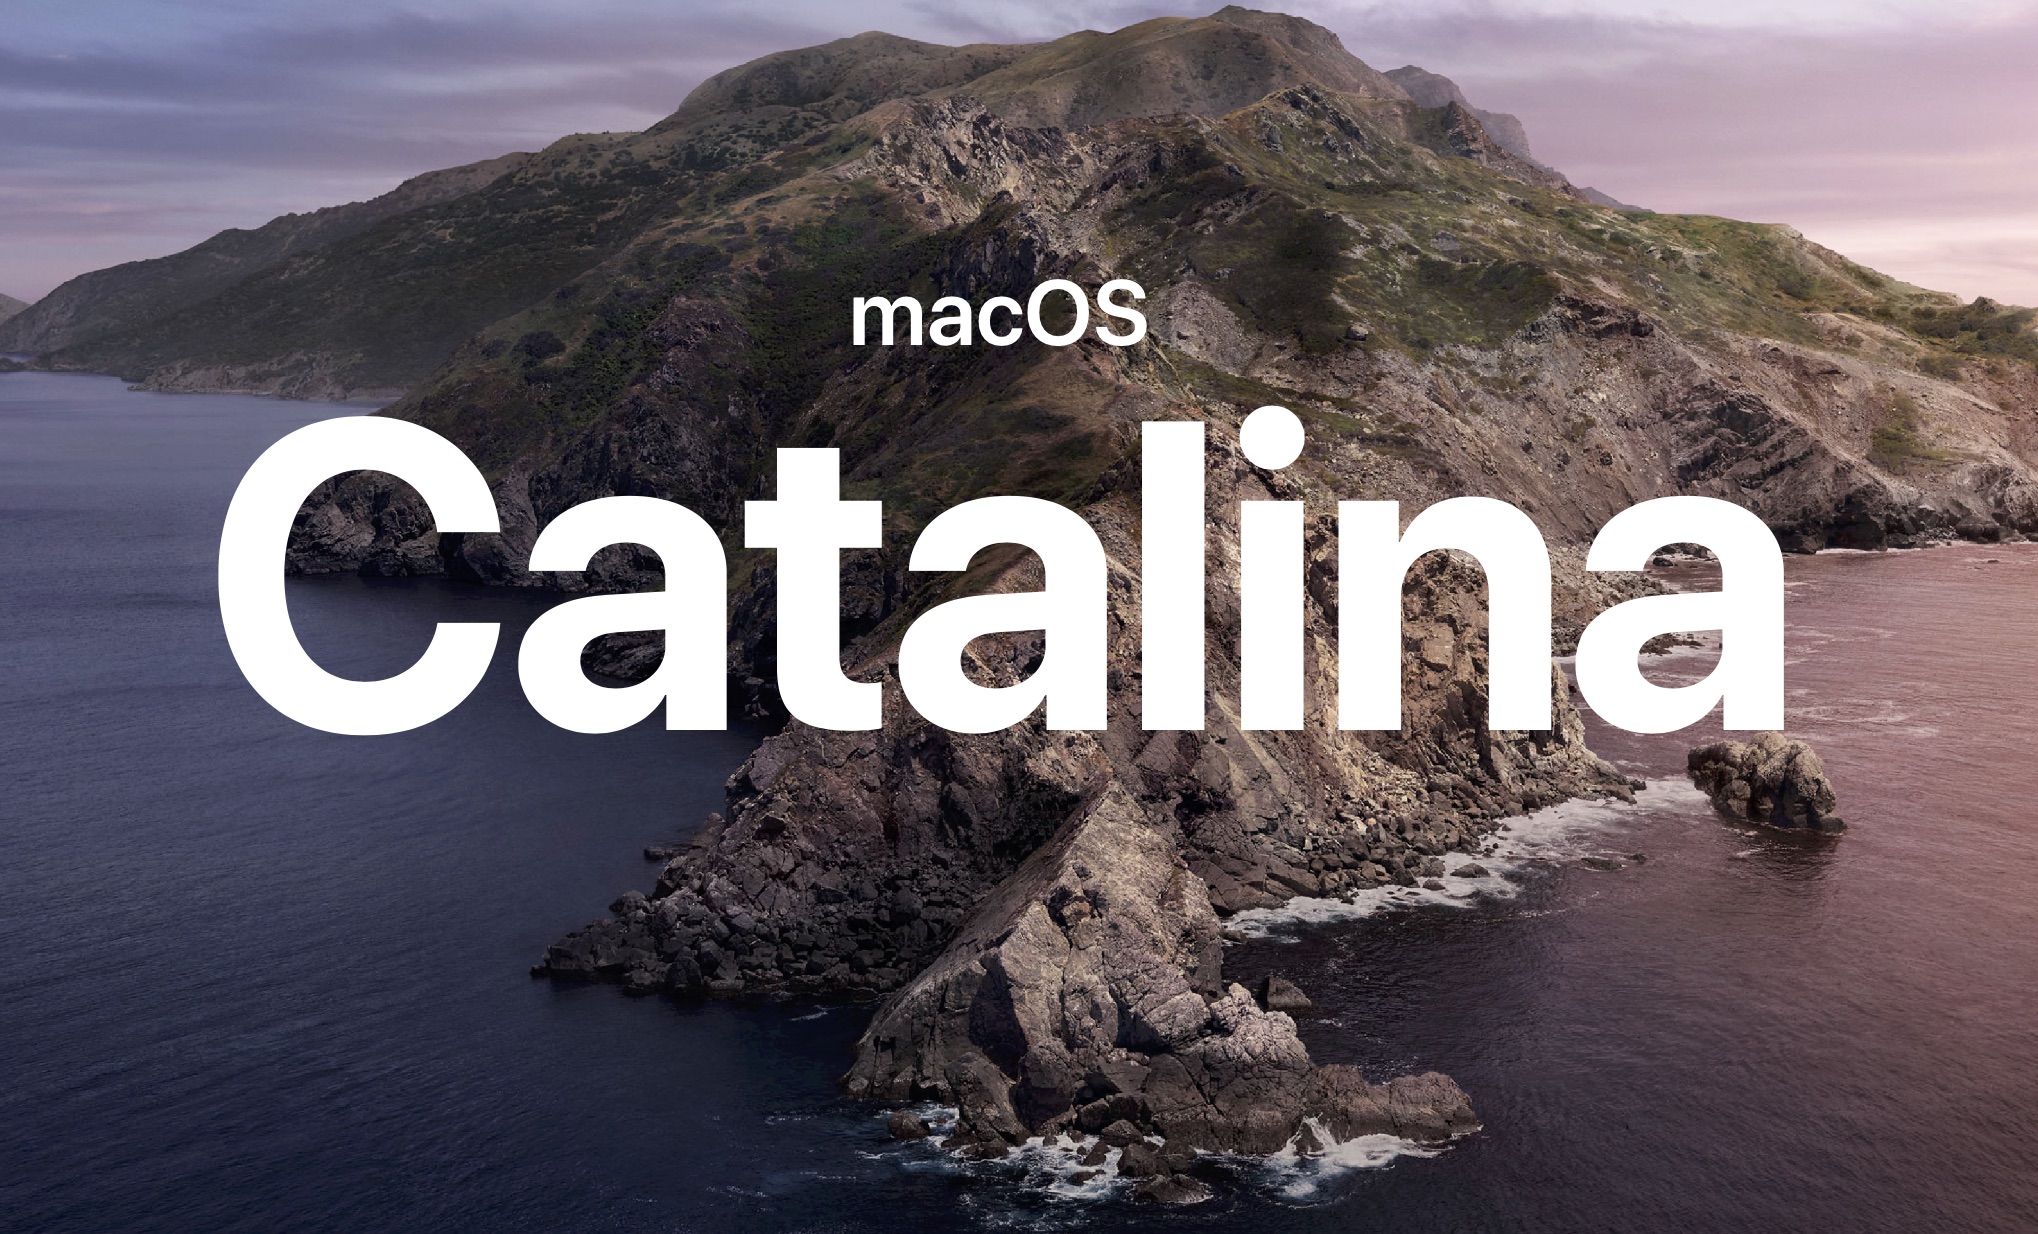 Macos catalina 10 15 officially released here s what s new how to install it 527699 2